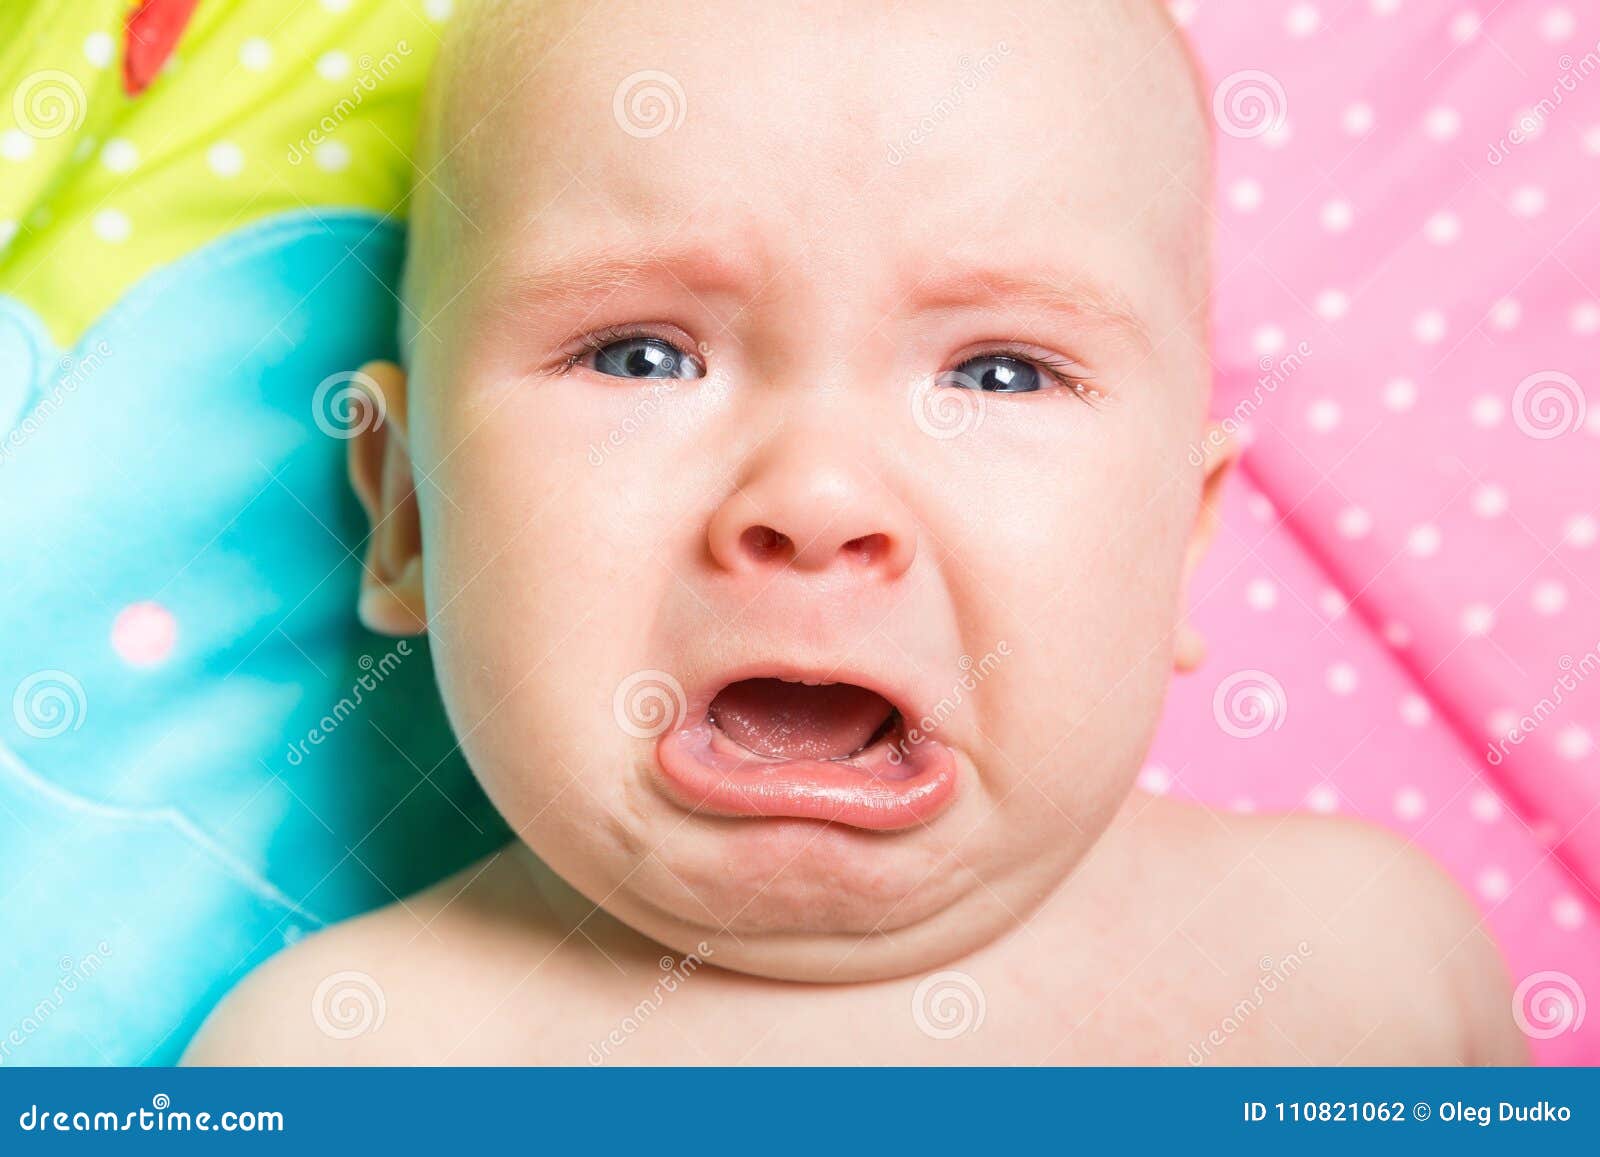 A Cute Baby Crying On A Bed Stock Photo Image Of Childhood Birth 110821062